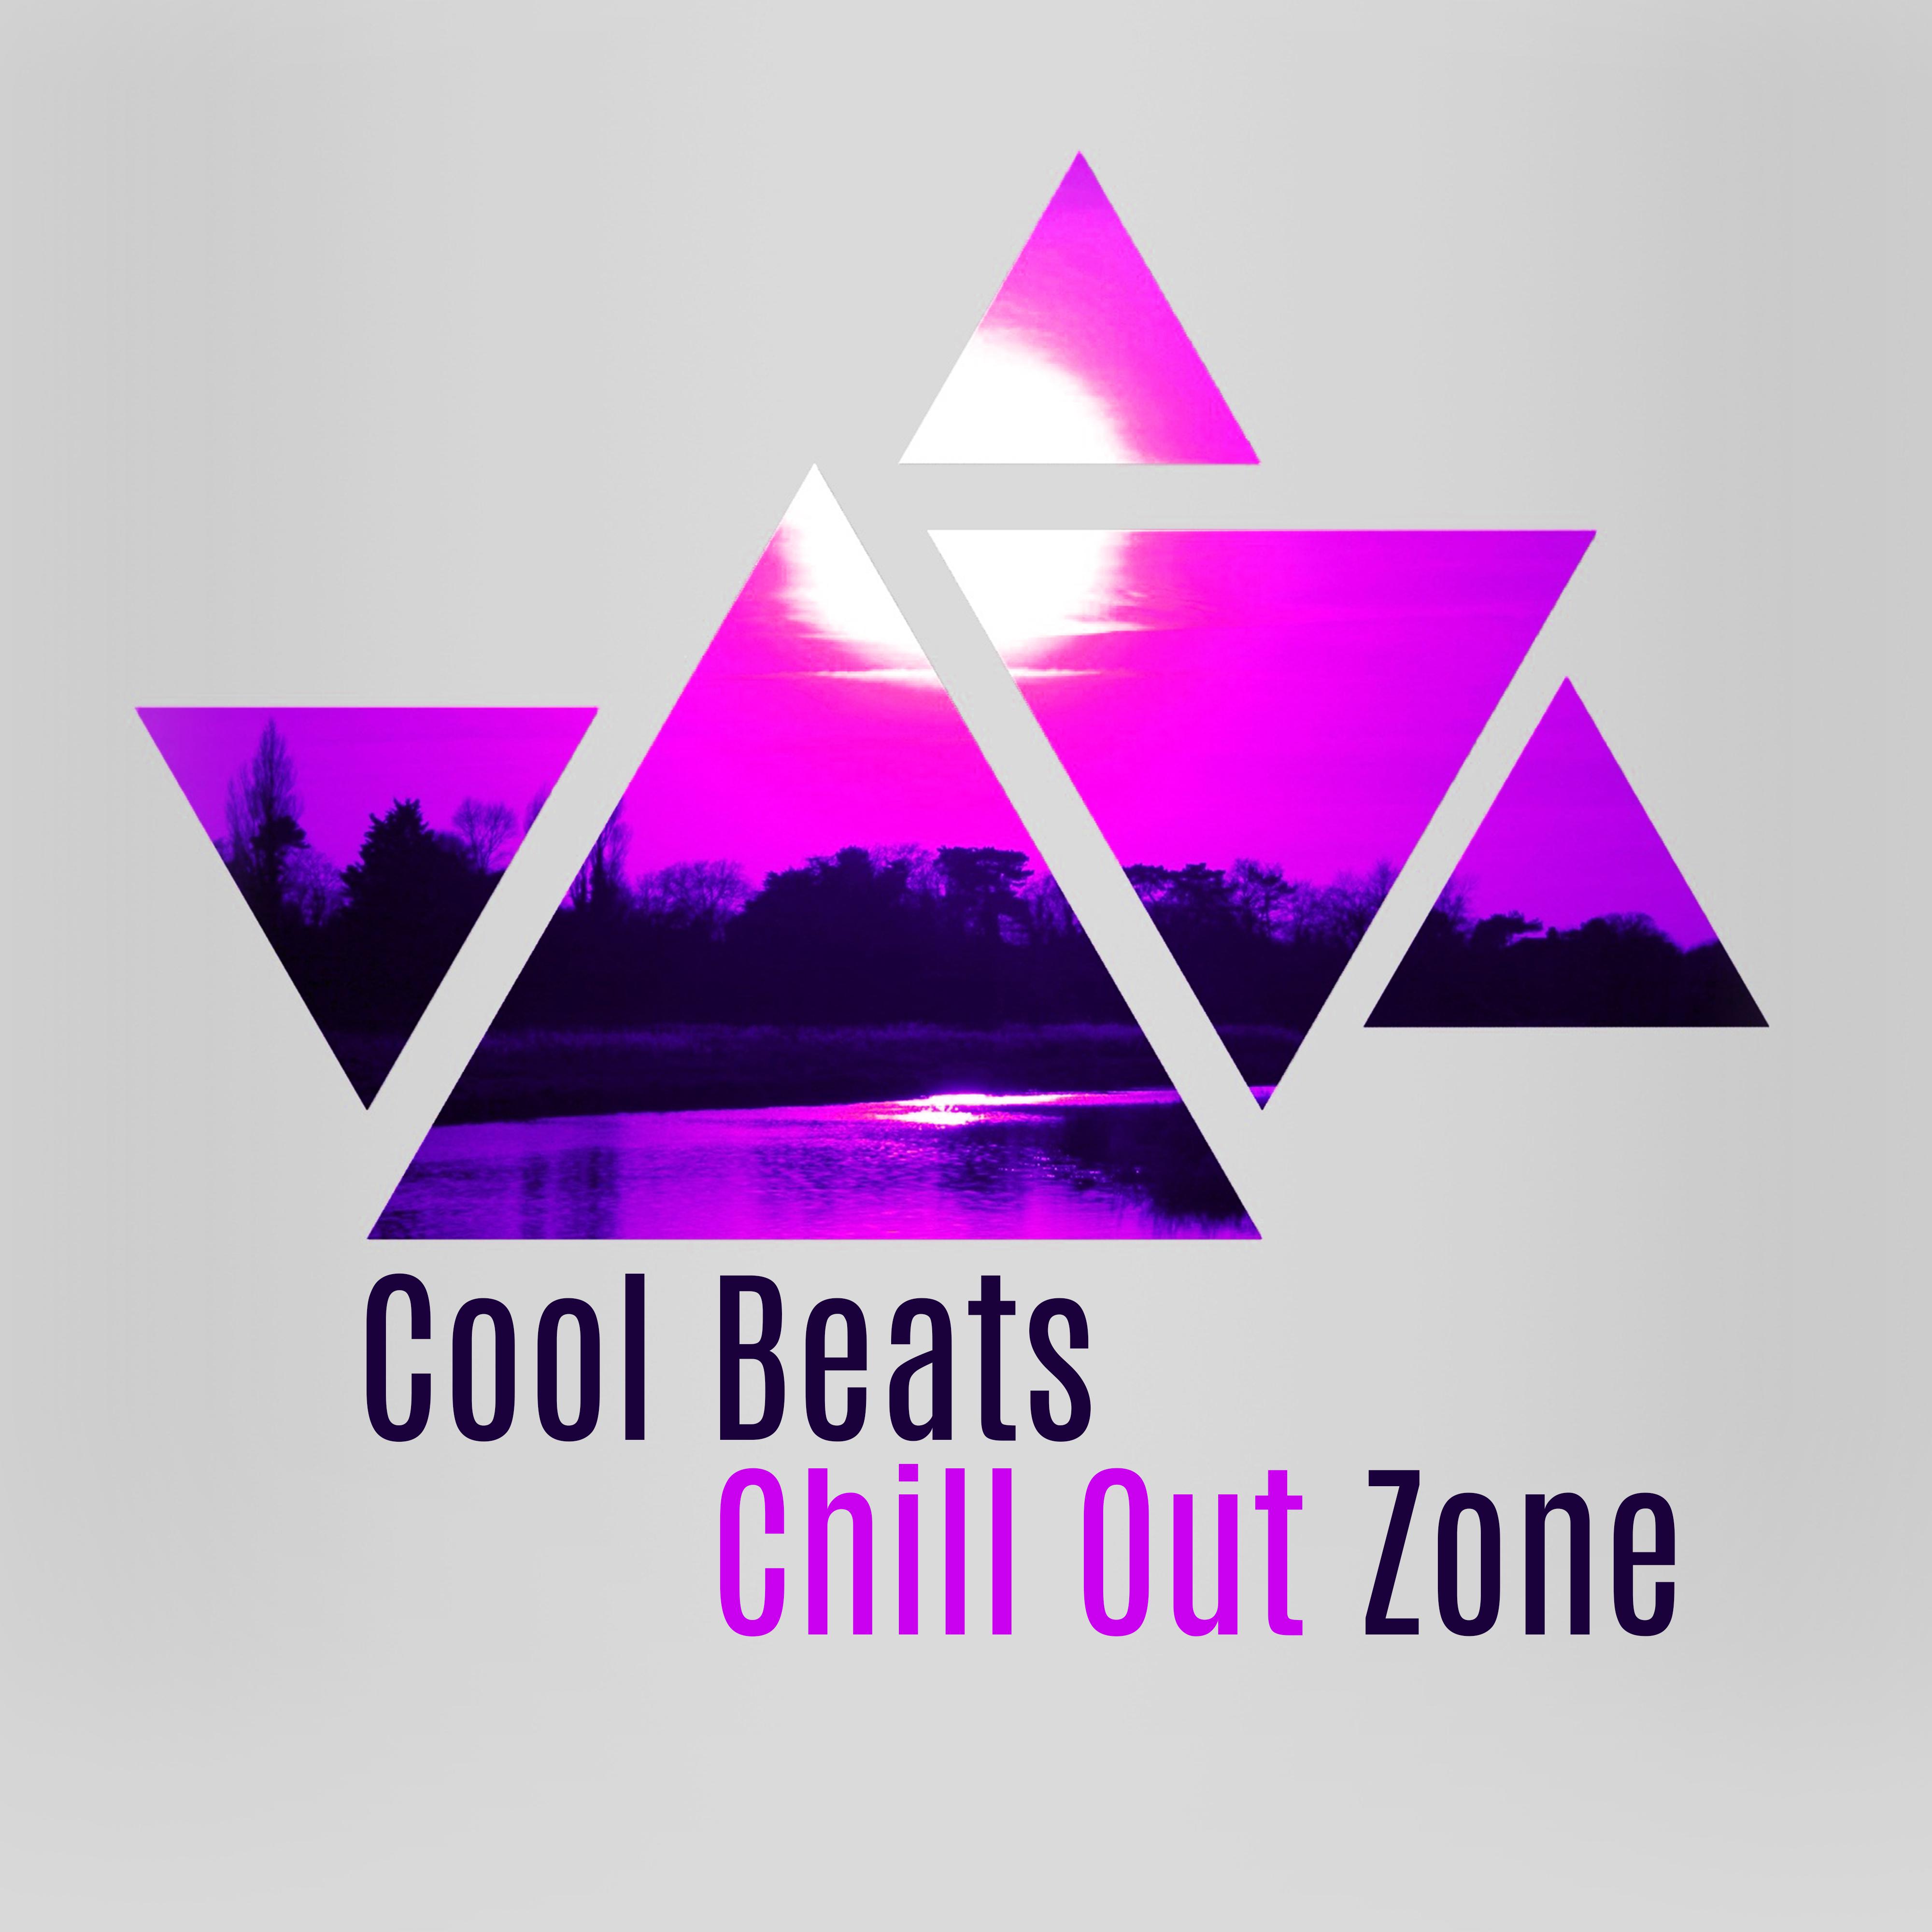 Cool Beats Chill Out Zone – Ibiza Club, Chill Out Music, Summer Hits 2017, Relax By the Pool